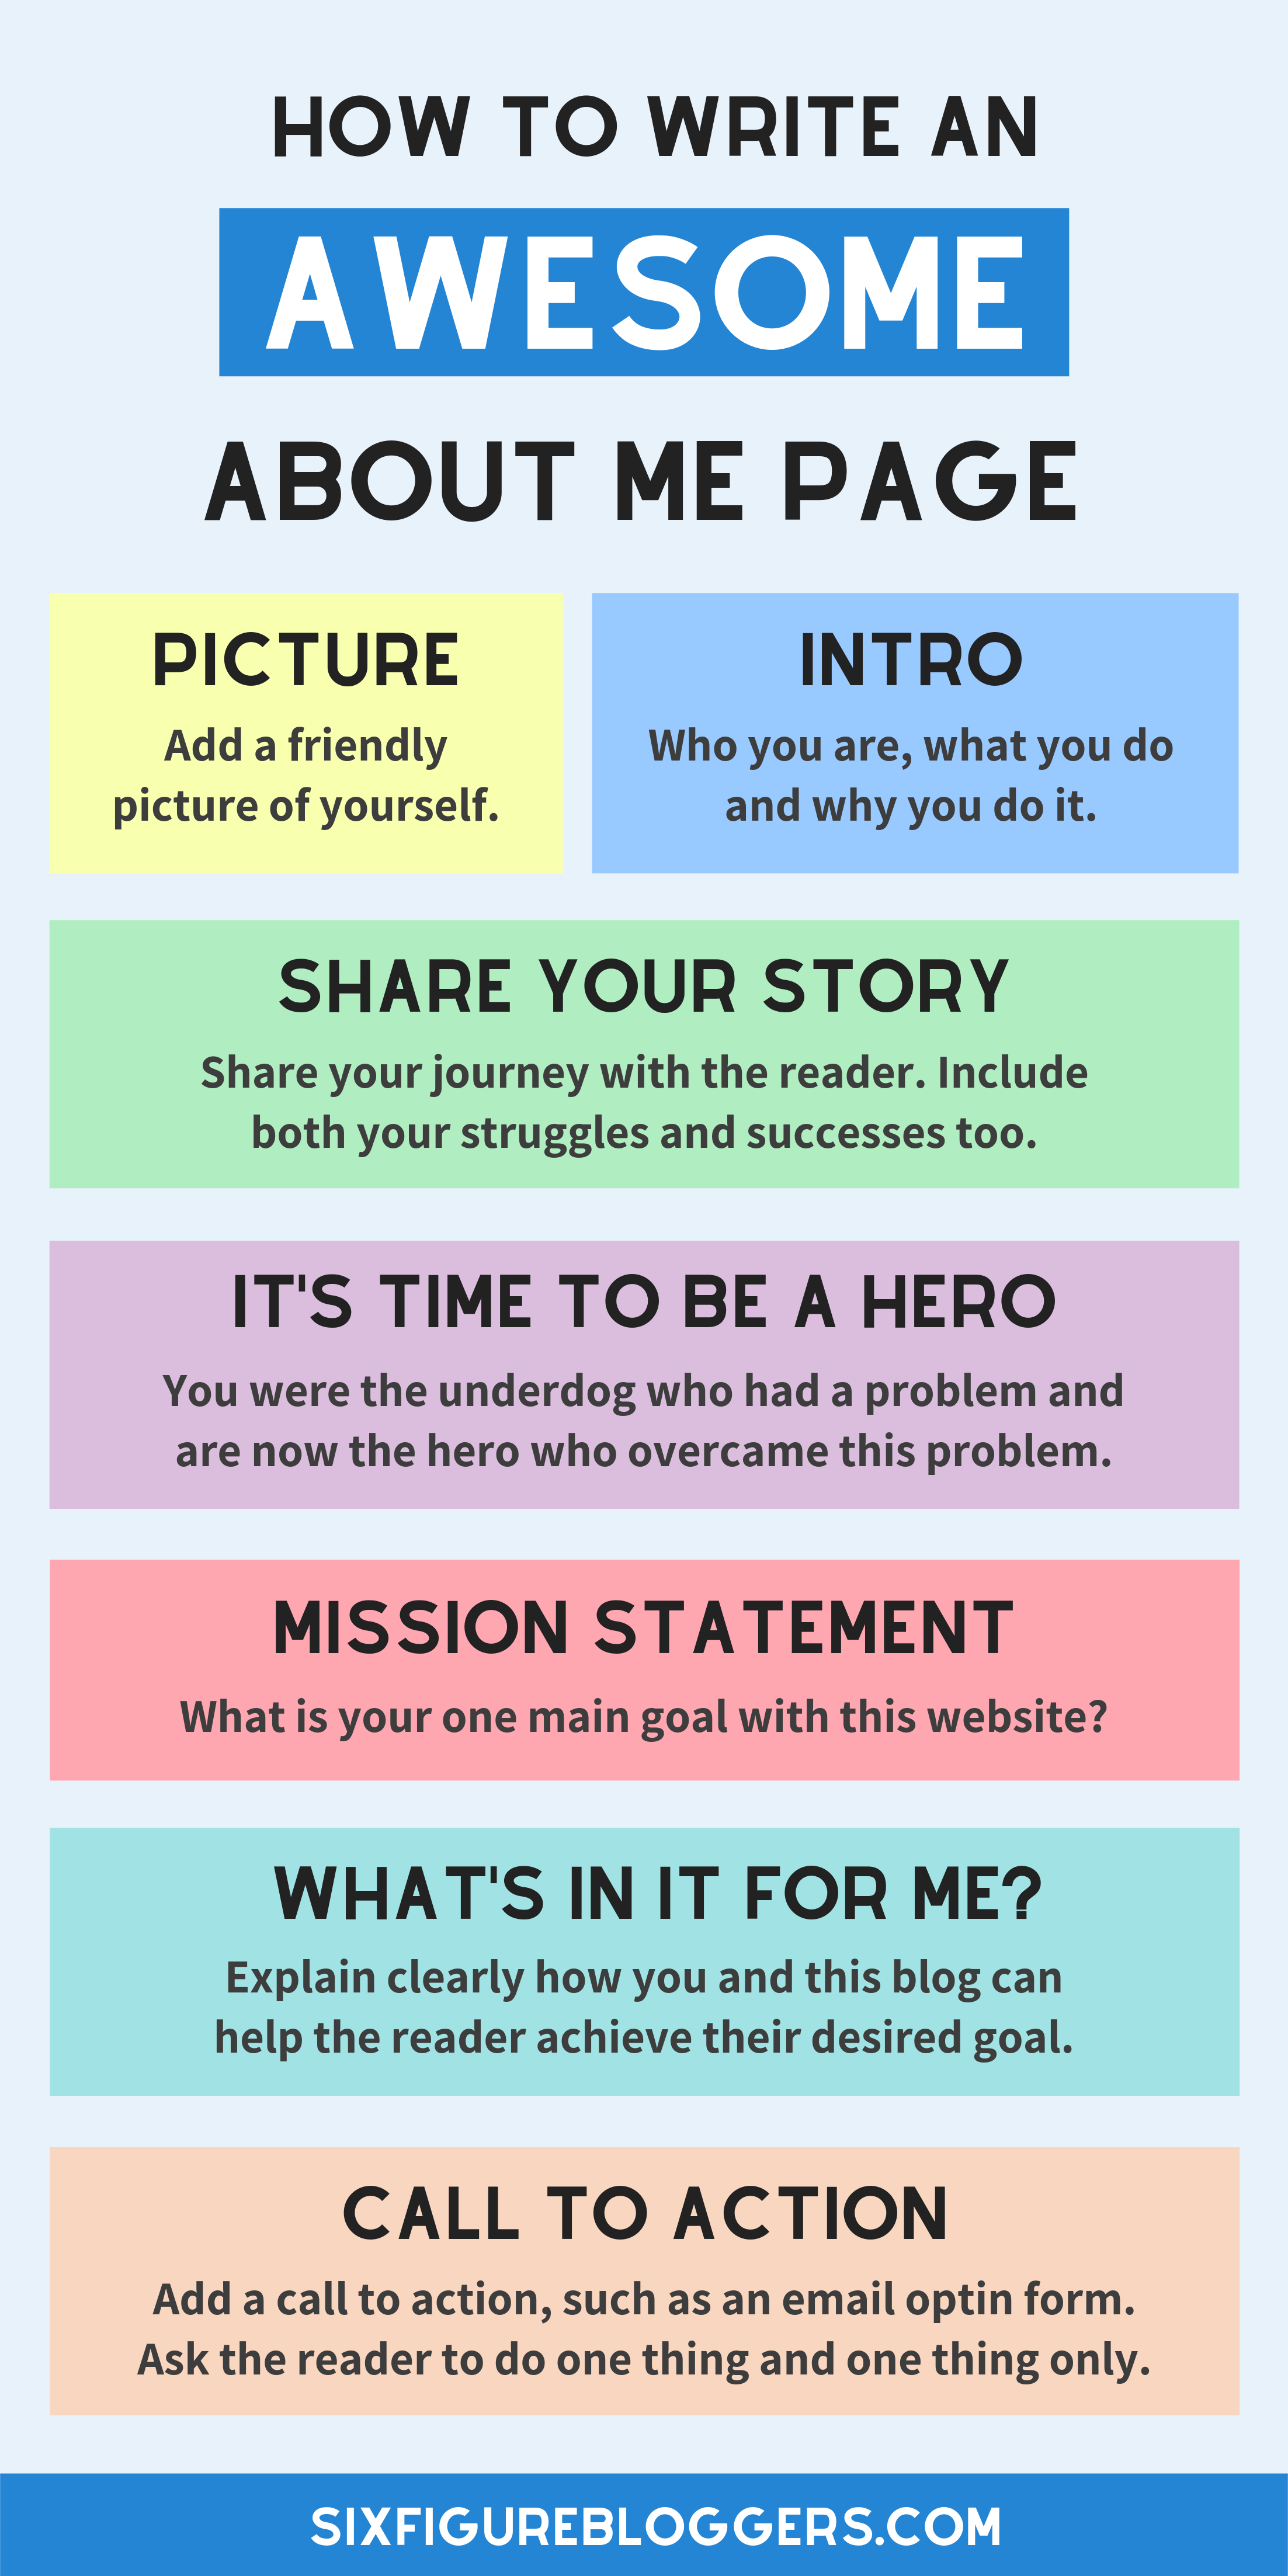 How To Write An About Me Page [Free Template Inside!]